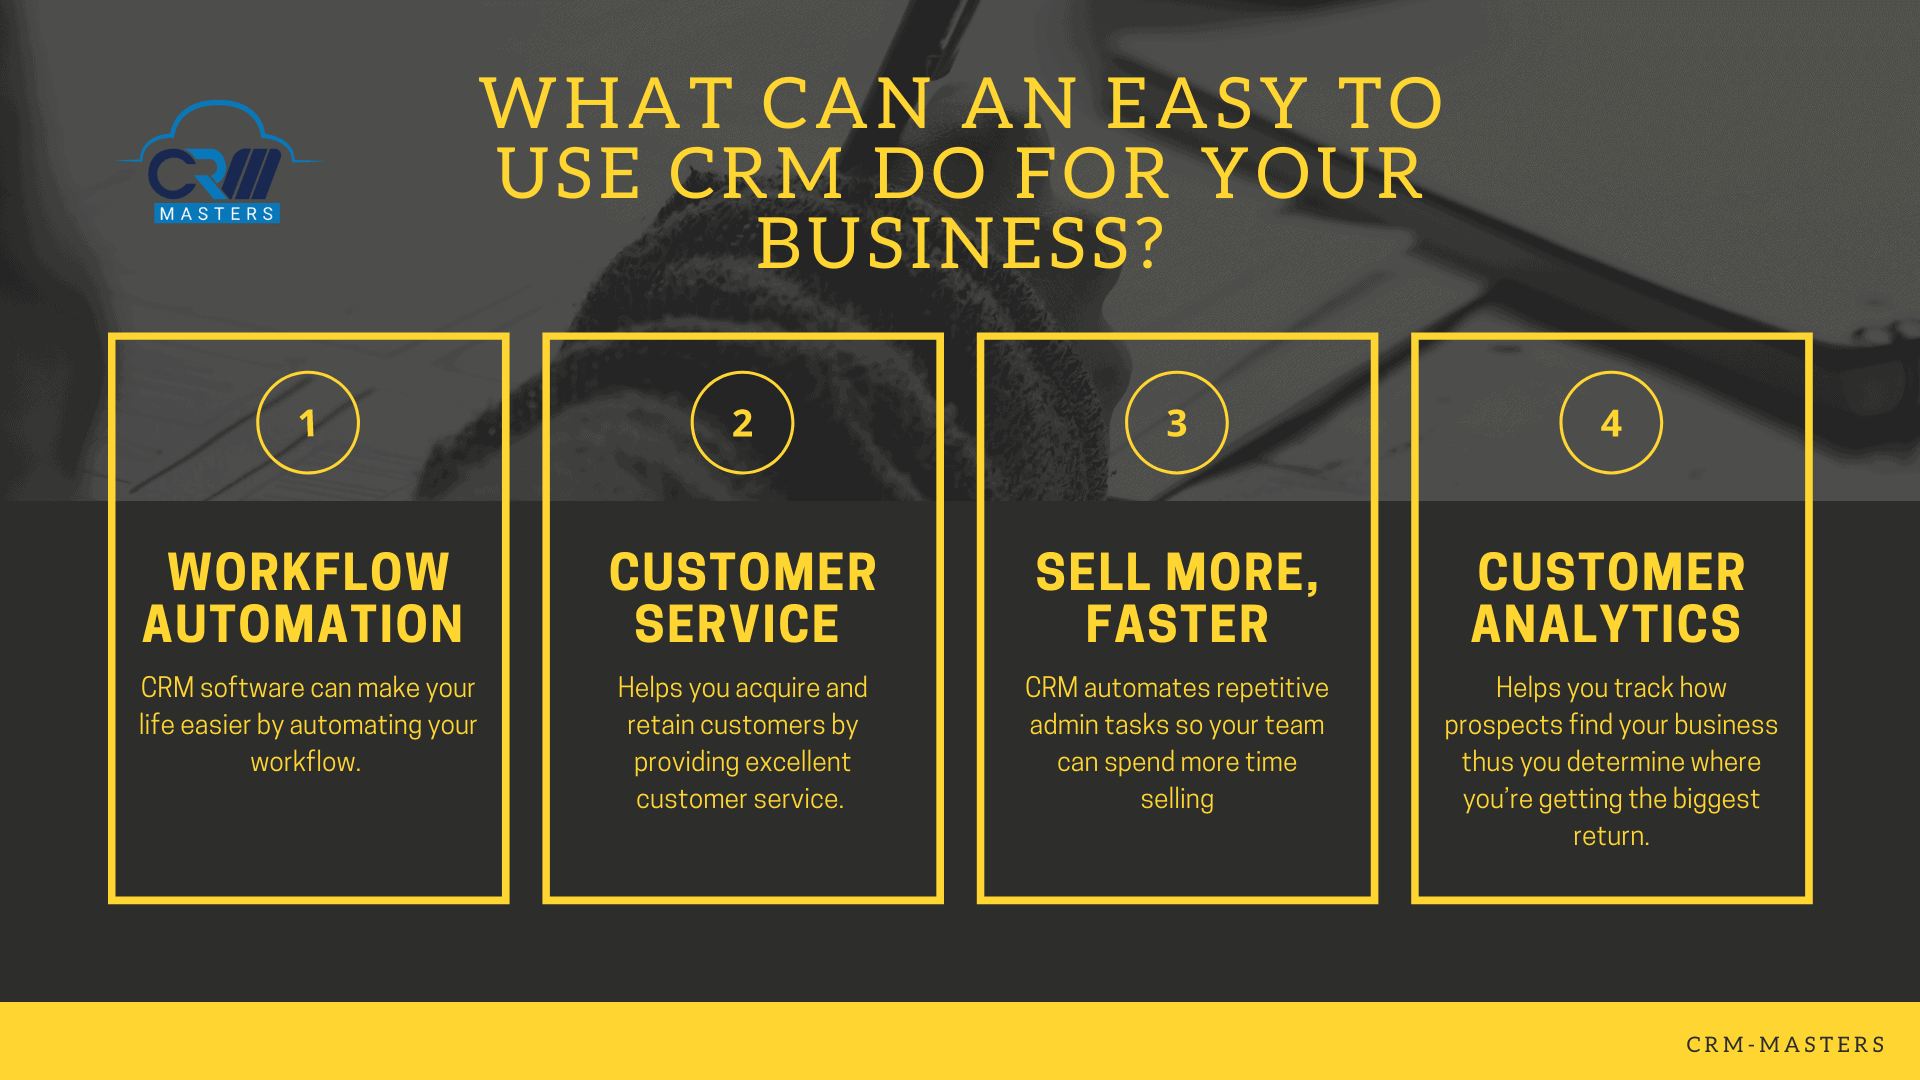 What Can An Easy To Use CRM Do For Your Business?